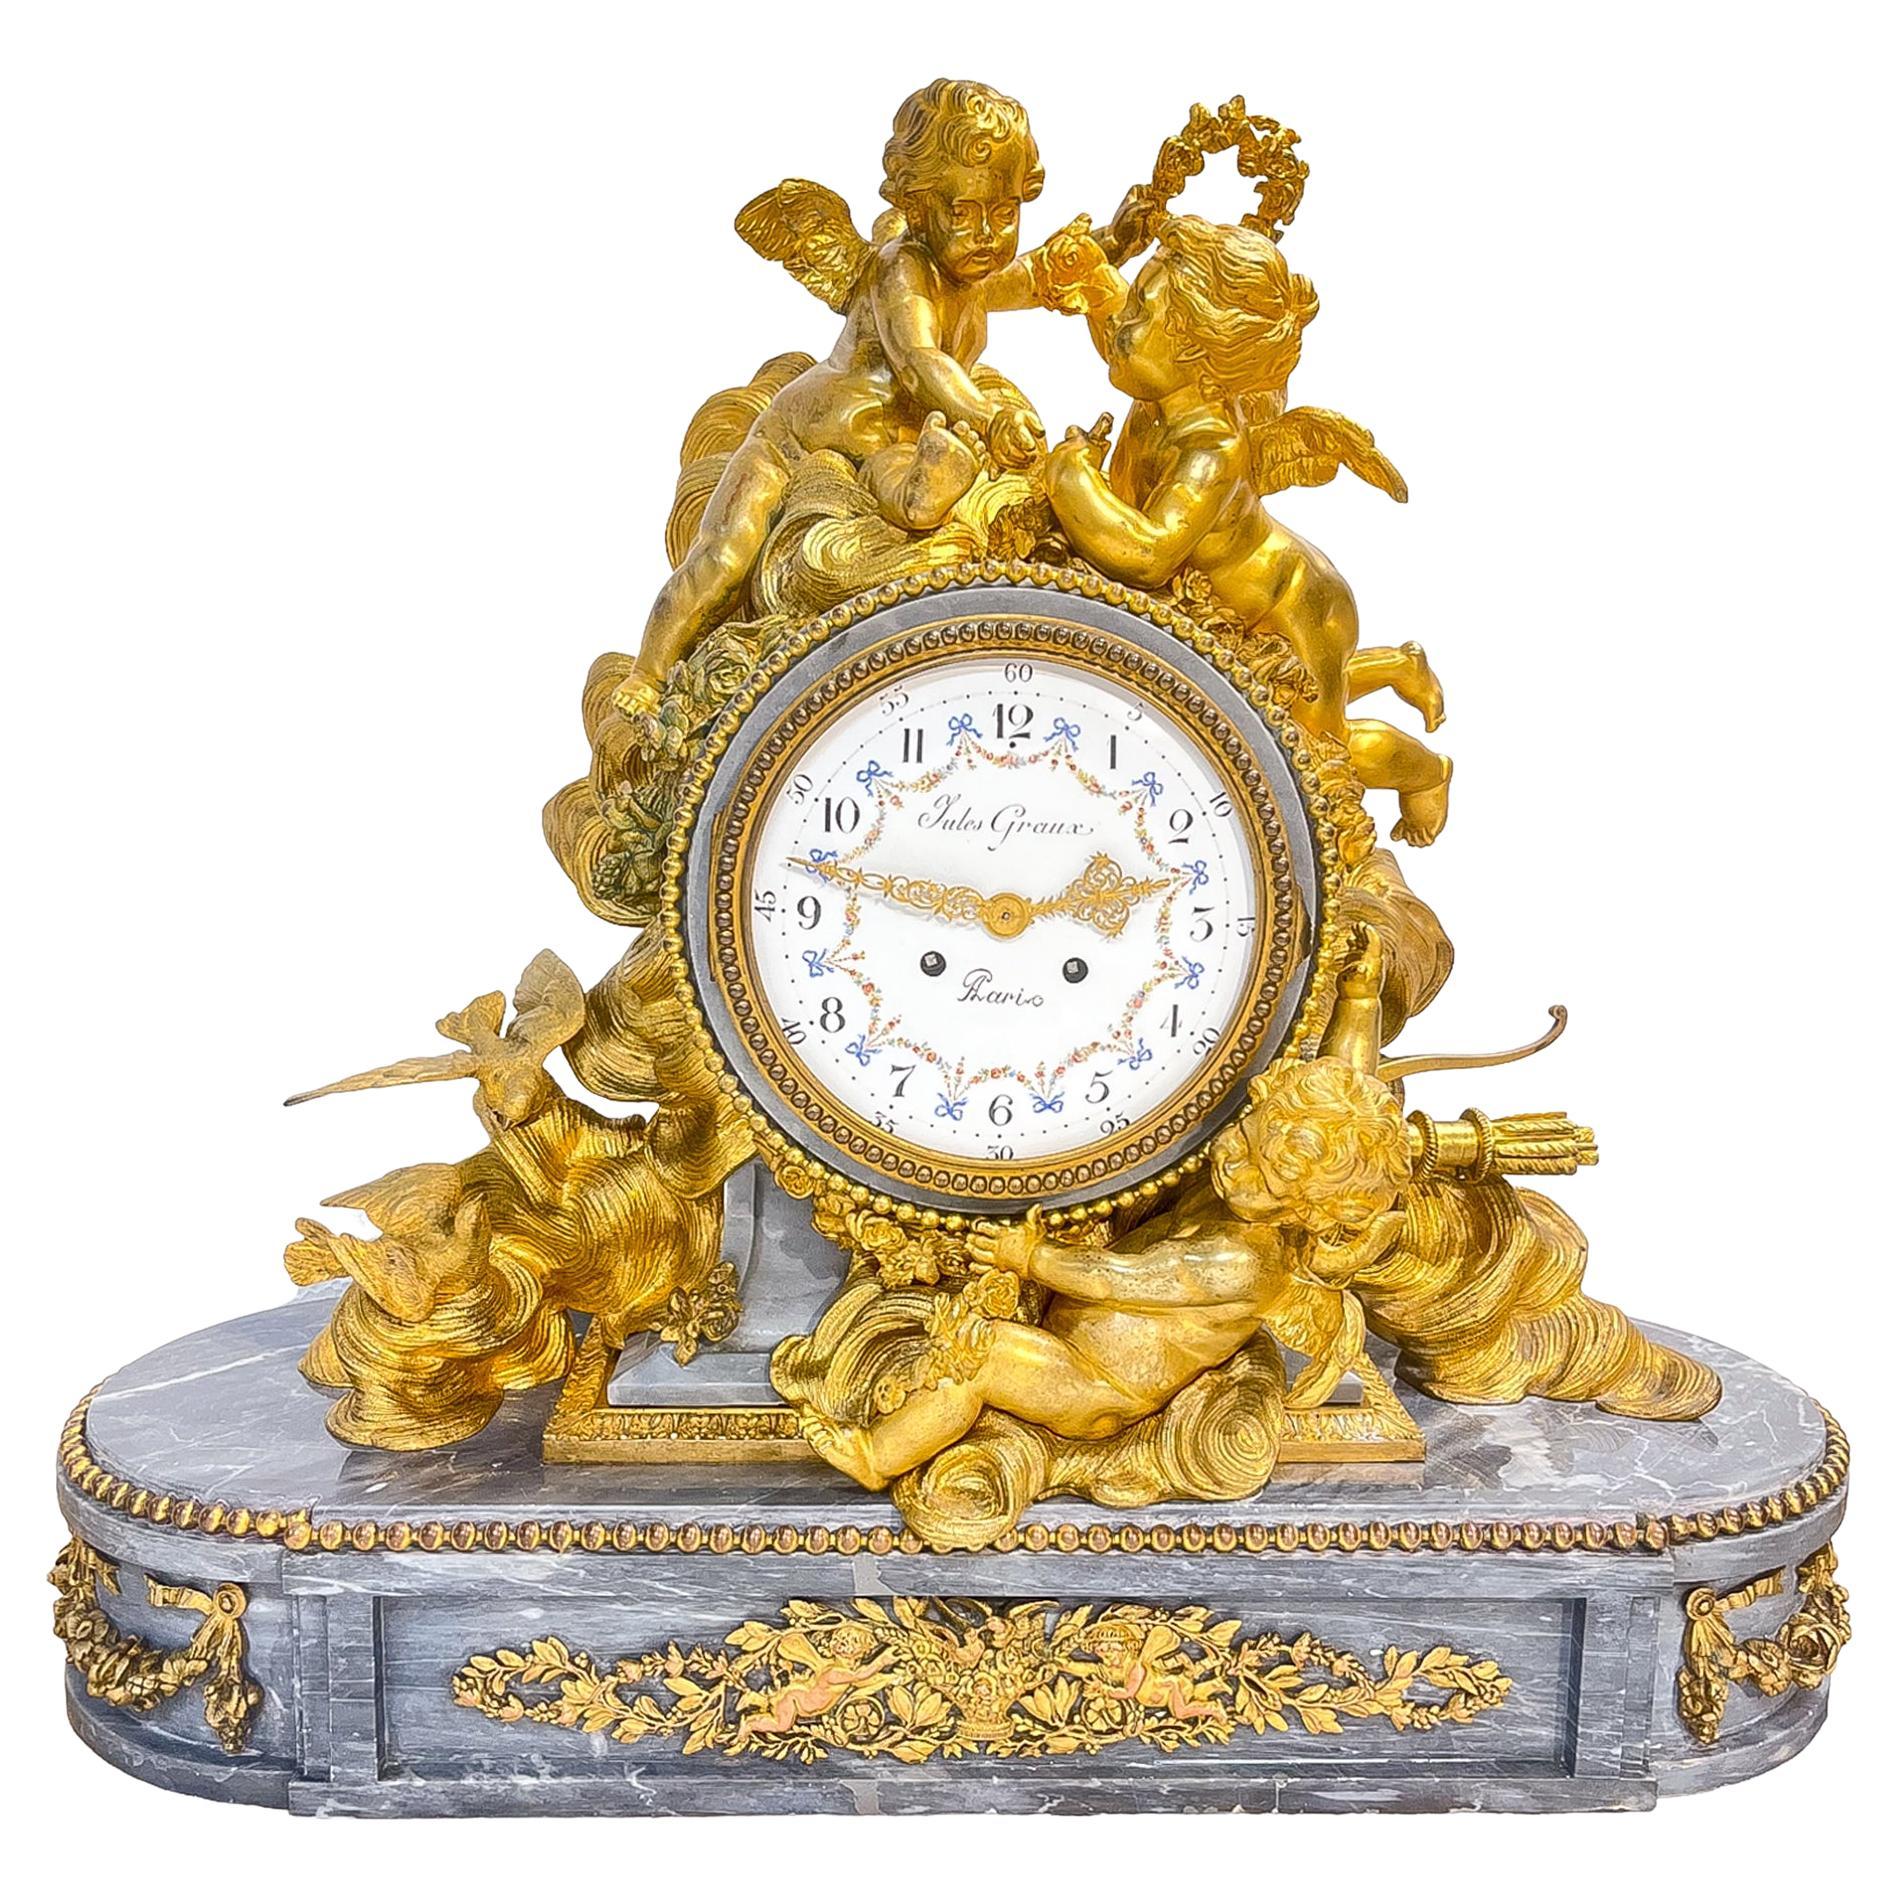 Monumental Louis XV Style Gilt-Bronze and Marble Clock with Putti in the Clouds